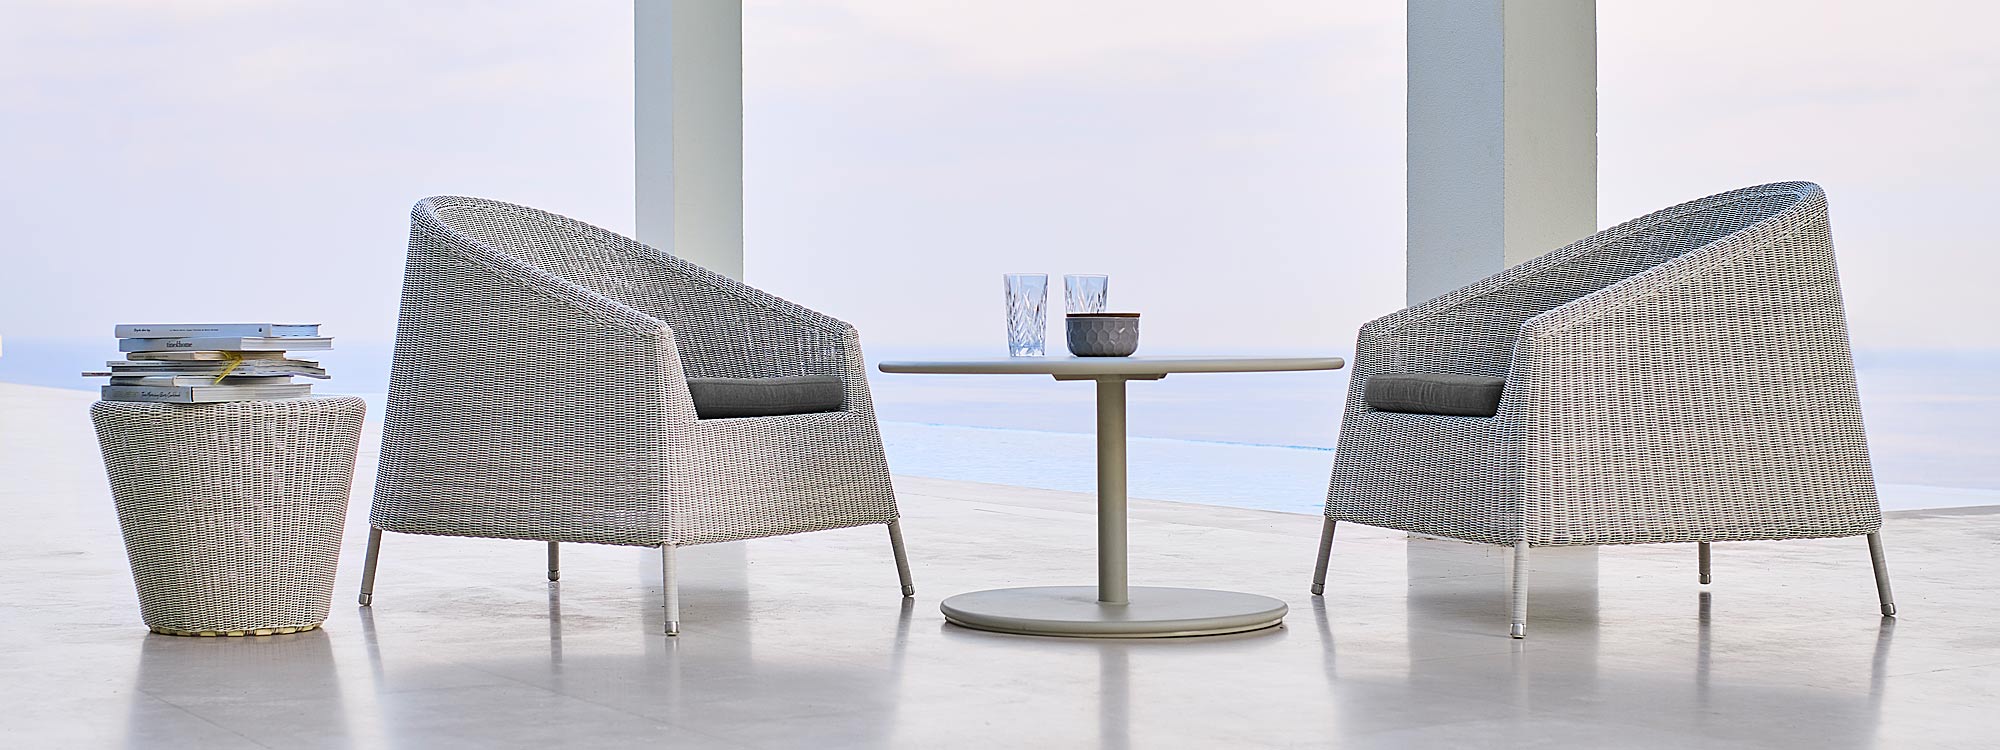 Image of pair of White-grey Kingston stacking garden lounge chairs and white Go coffee table by Cane-line